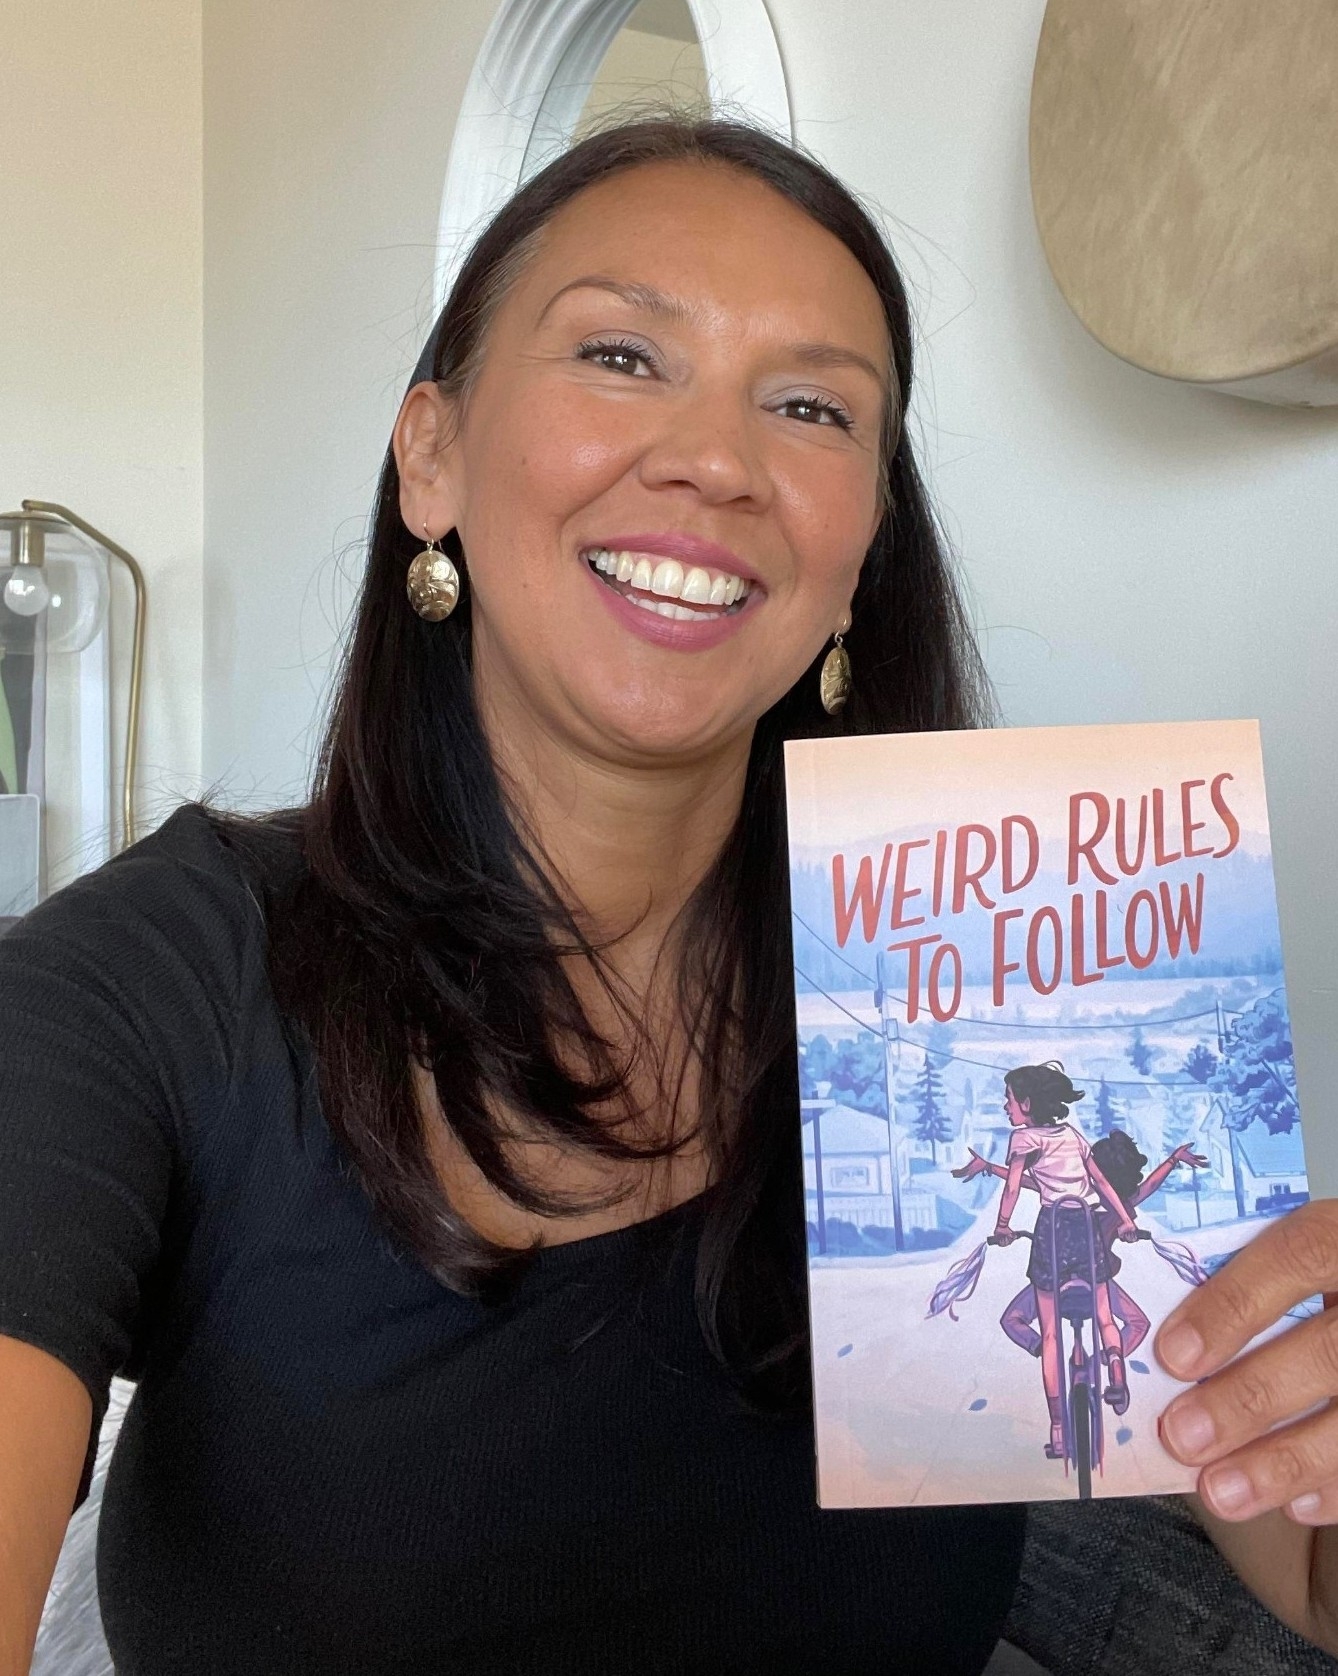 Kim Spencer holding her book "Weird Rules to Follow"